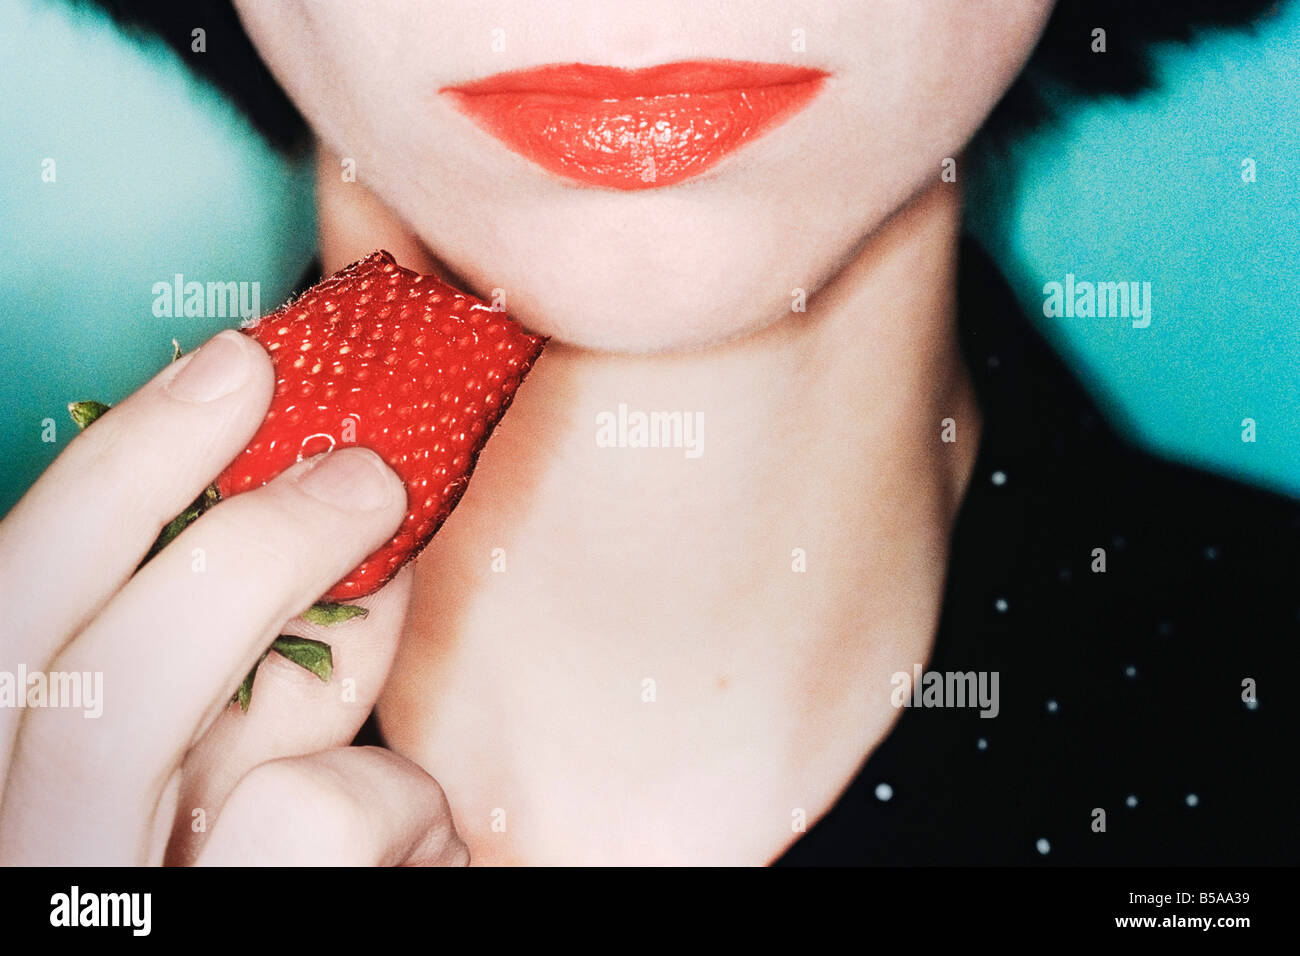 Woman Eating Strawberry Extreme Close up Stock Photo